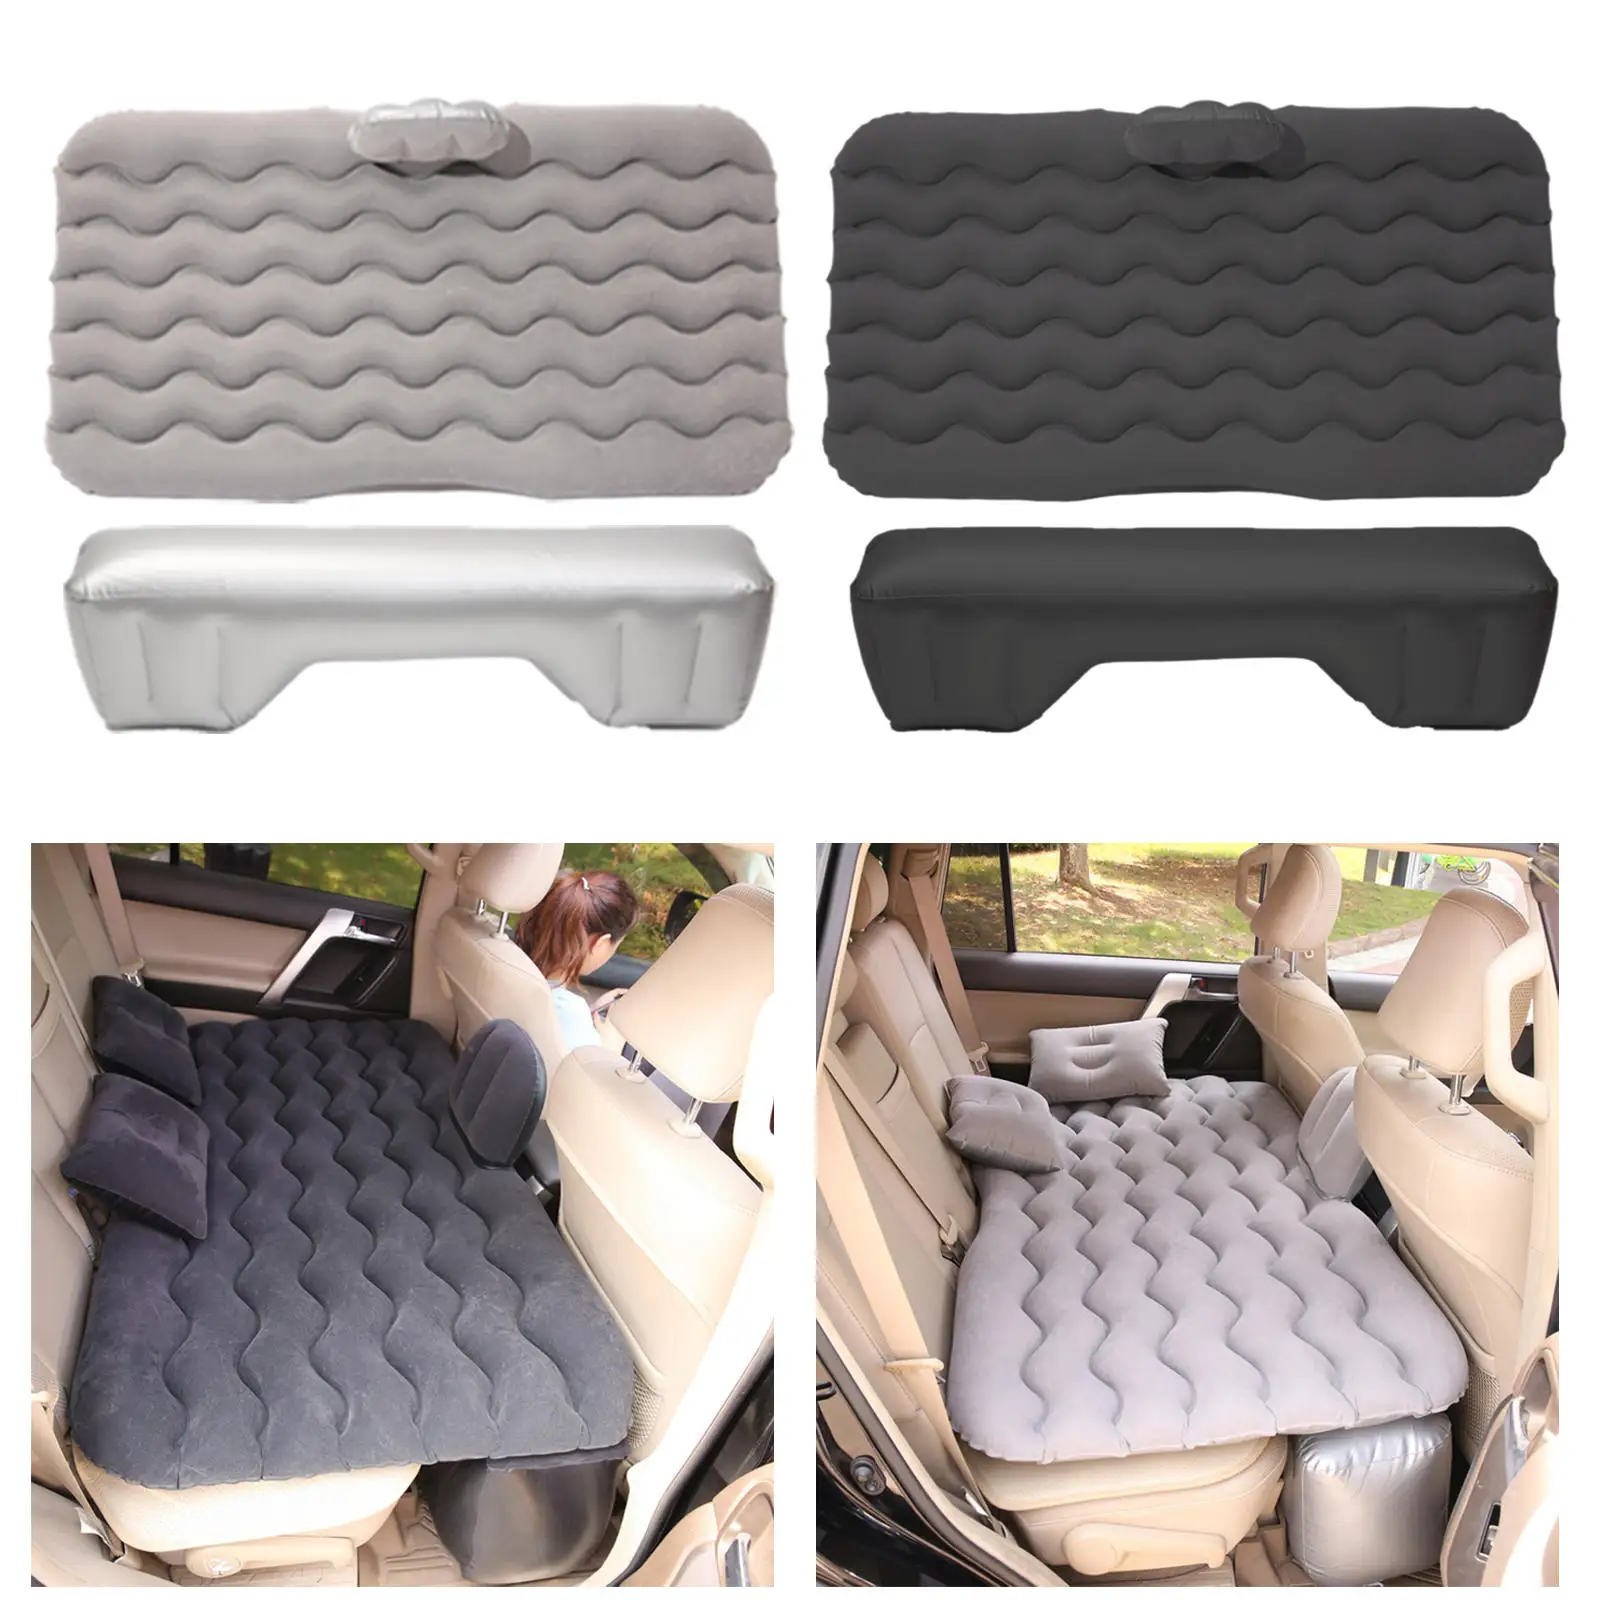 Back Seat Air Mattress Inflatable Sleeping Bed Rest Cushion with 2 Pillows Blow-Up Pad for Camping Travel SUV Hiking Backpacking